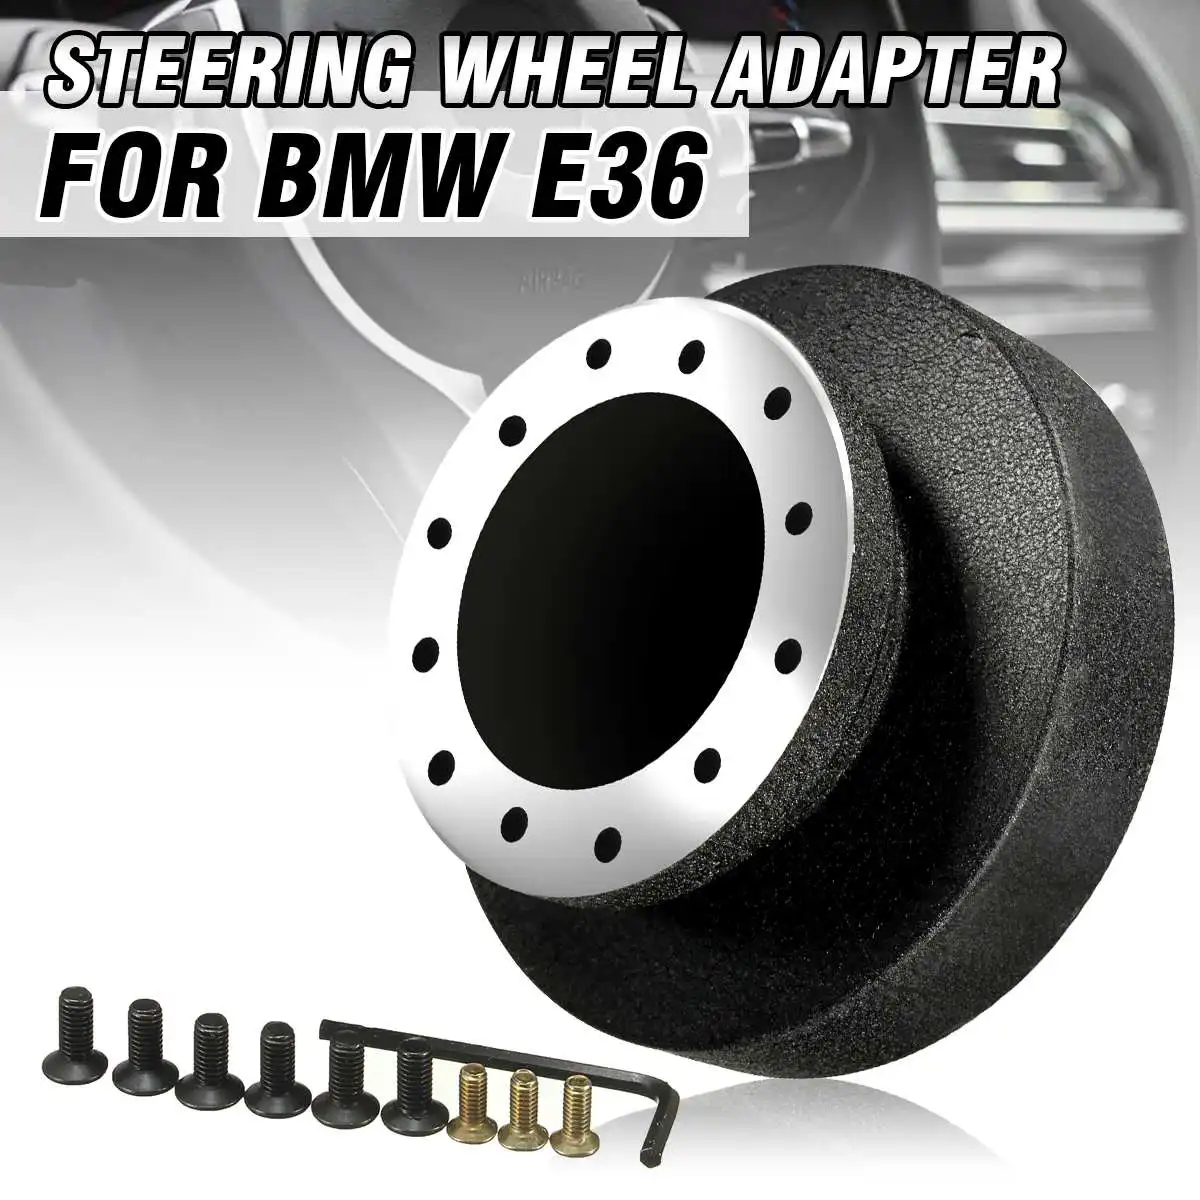 Steering Wheel Racing Hub Adapter Boss Kit Fit For BMW E36 for Nardi for Personal Abarth Indy Raid Italvolanti etc